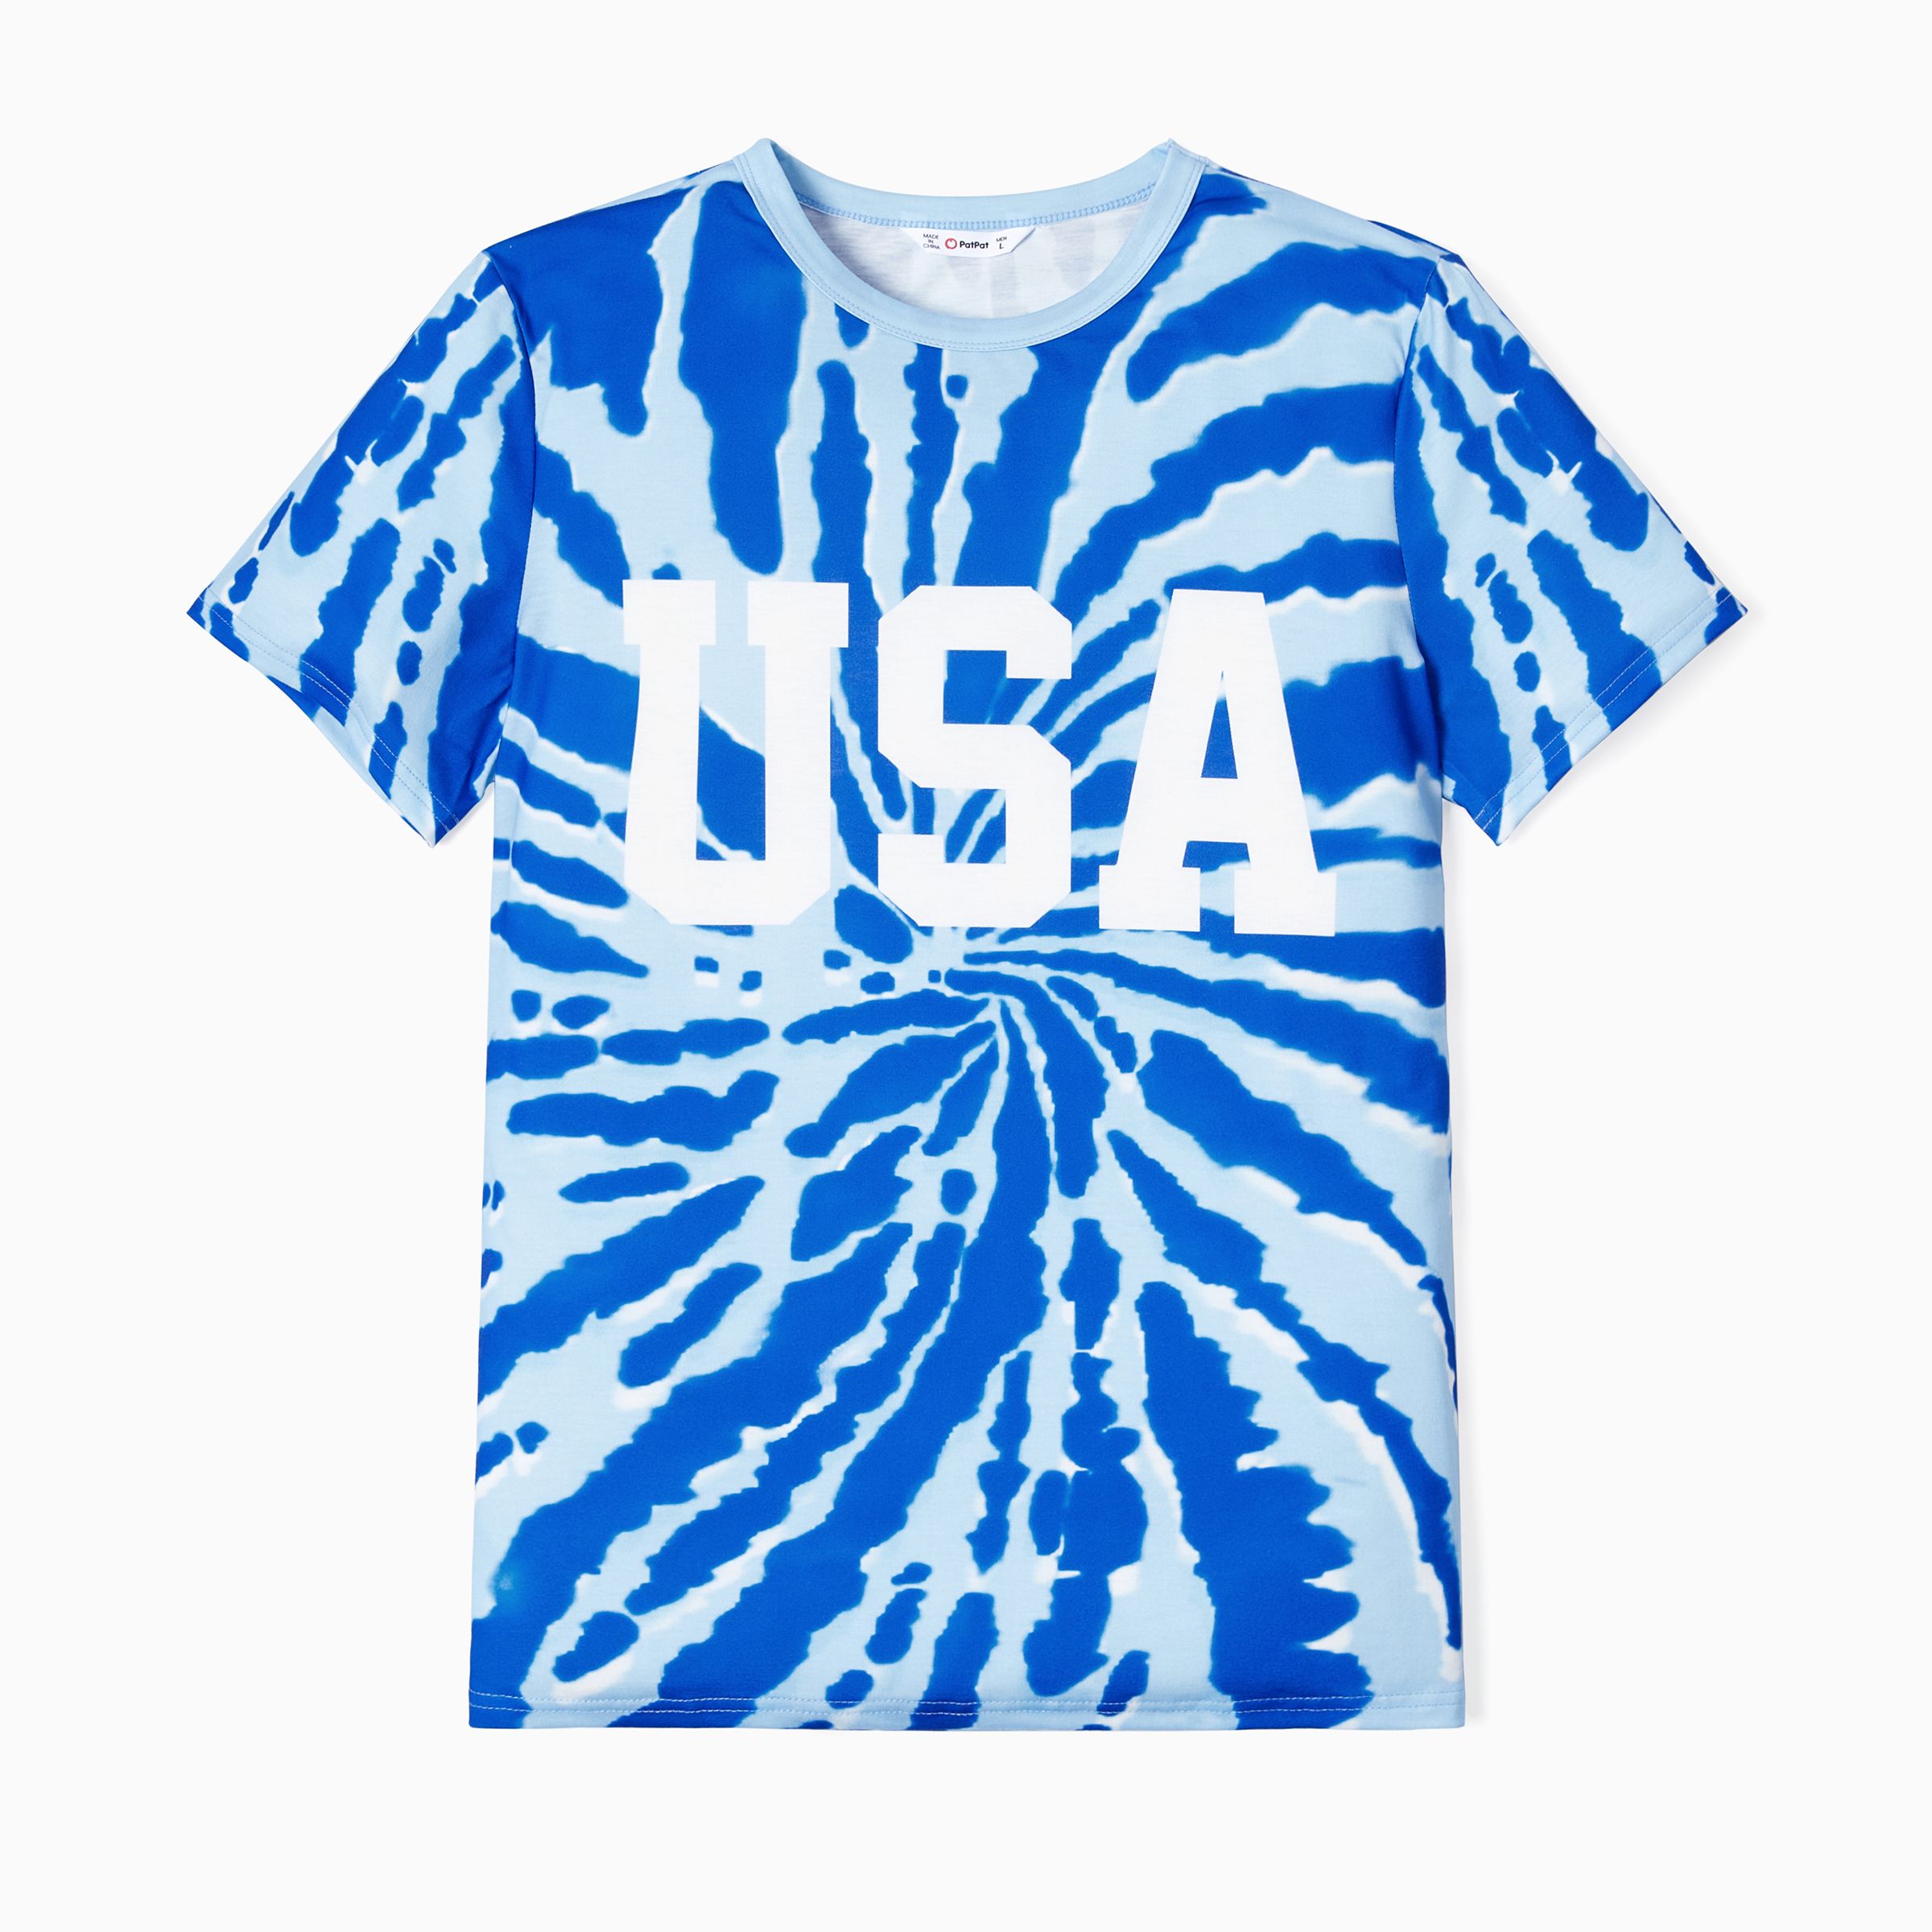 Family Matching Tie-Dye Print USA Short Sleeves Letter Top